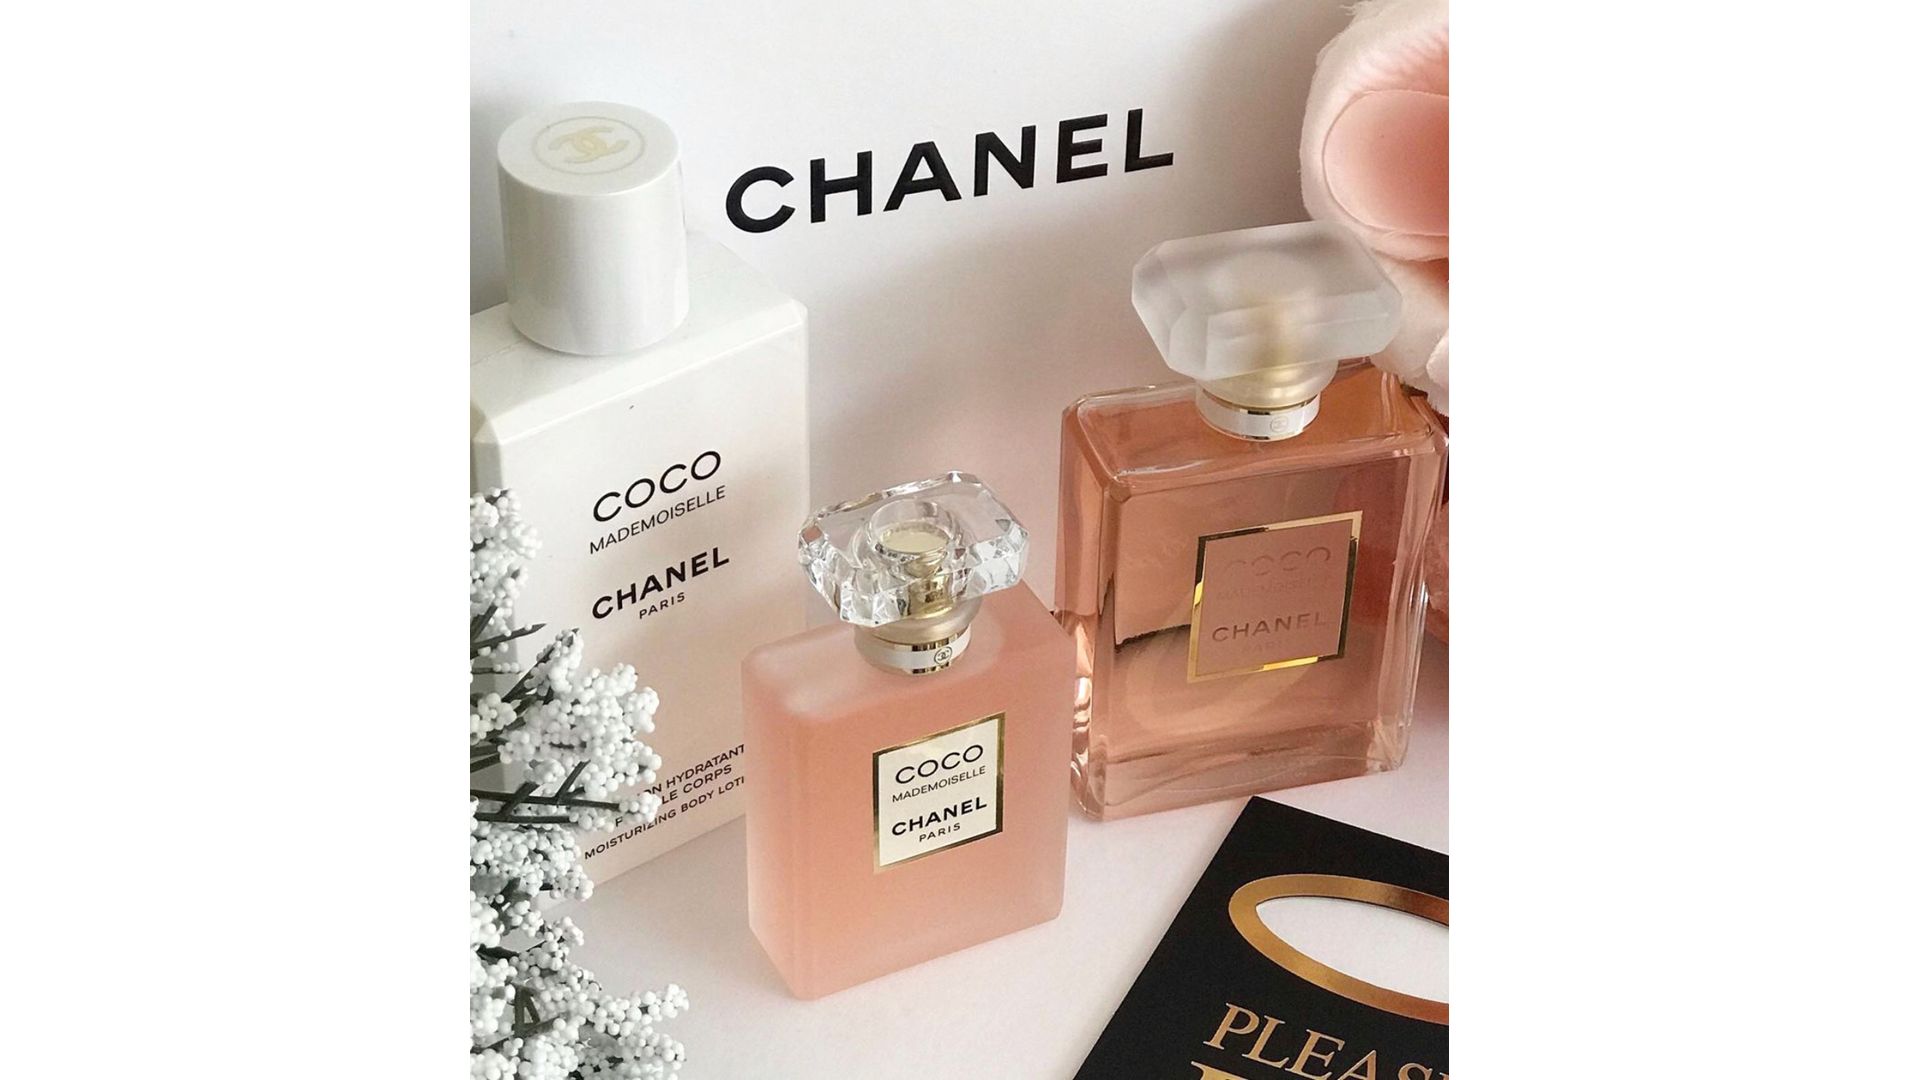 Chanel Perfumes for sale in Port Brownsville, Texas, Facebook Marketplace